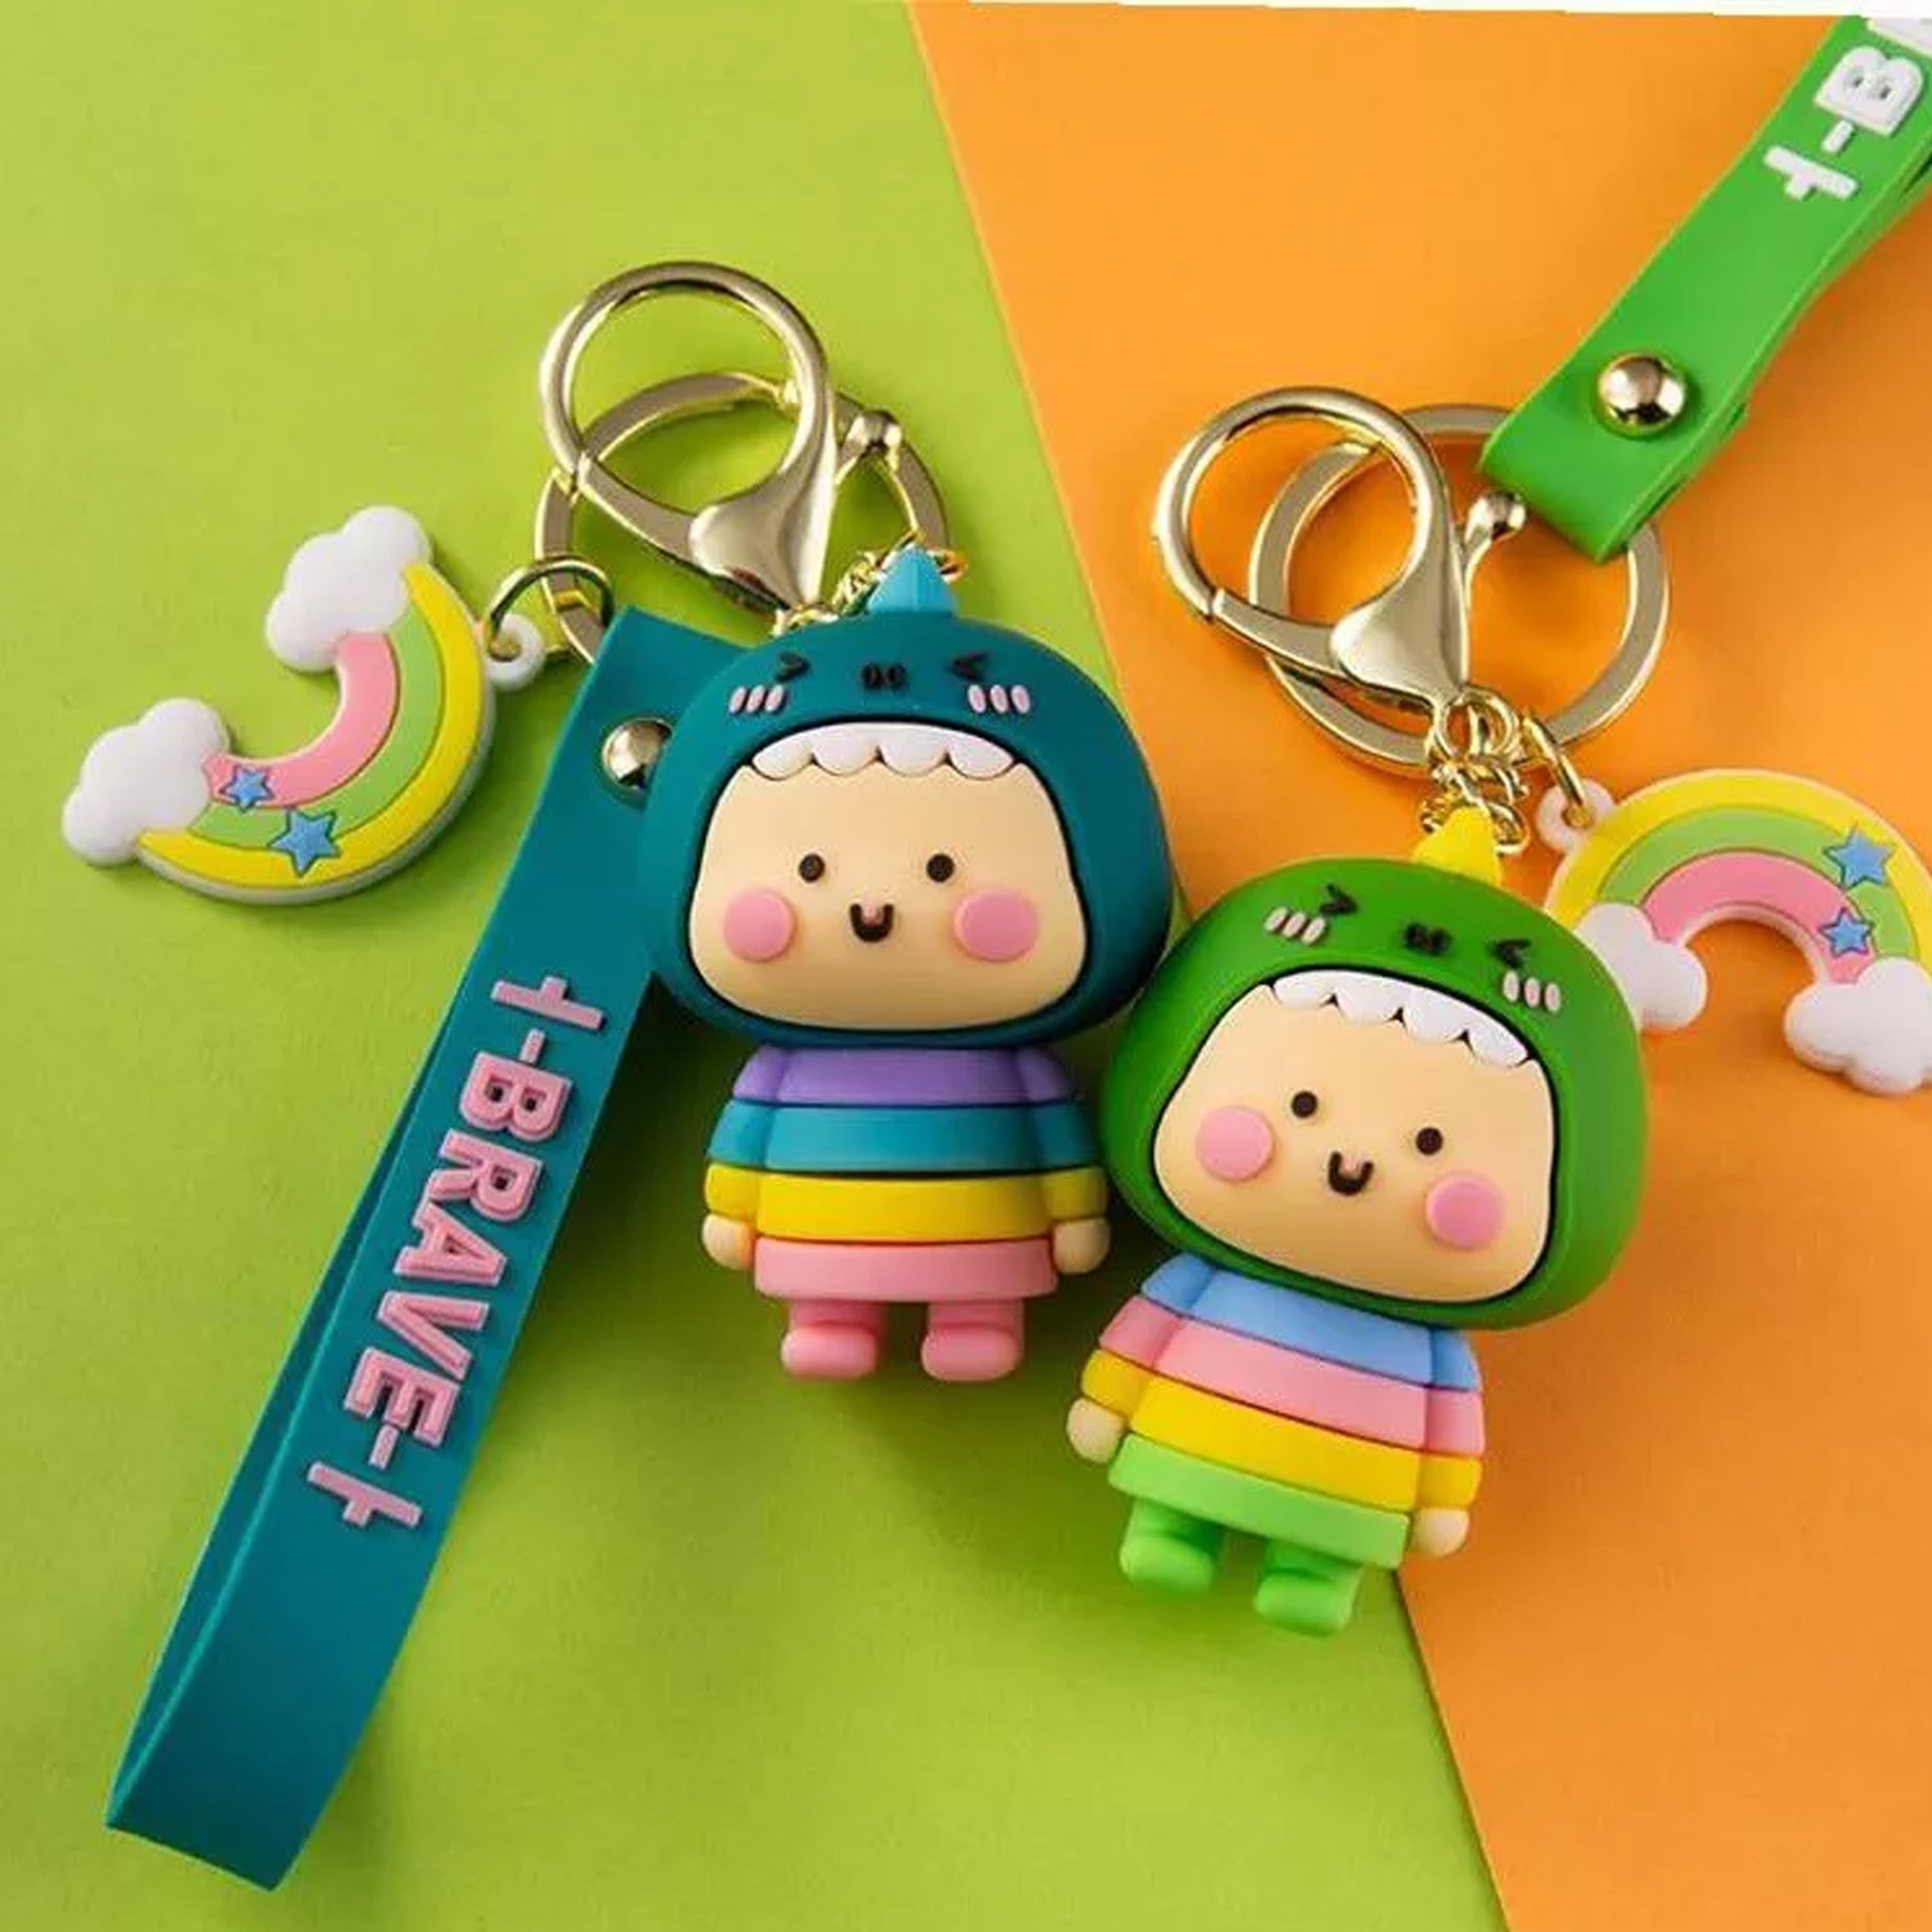 Get Your Hands on Adorable 3D Dinosaur Shaped Keychains - Assorted